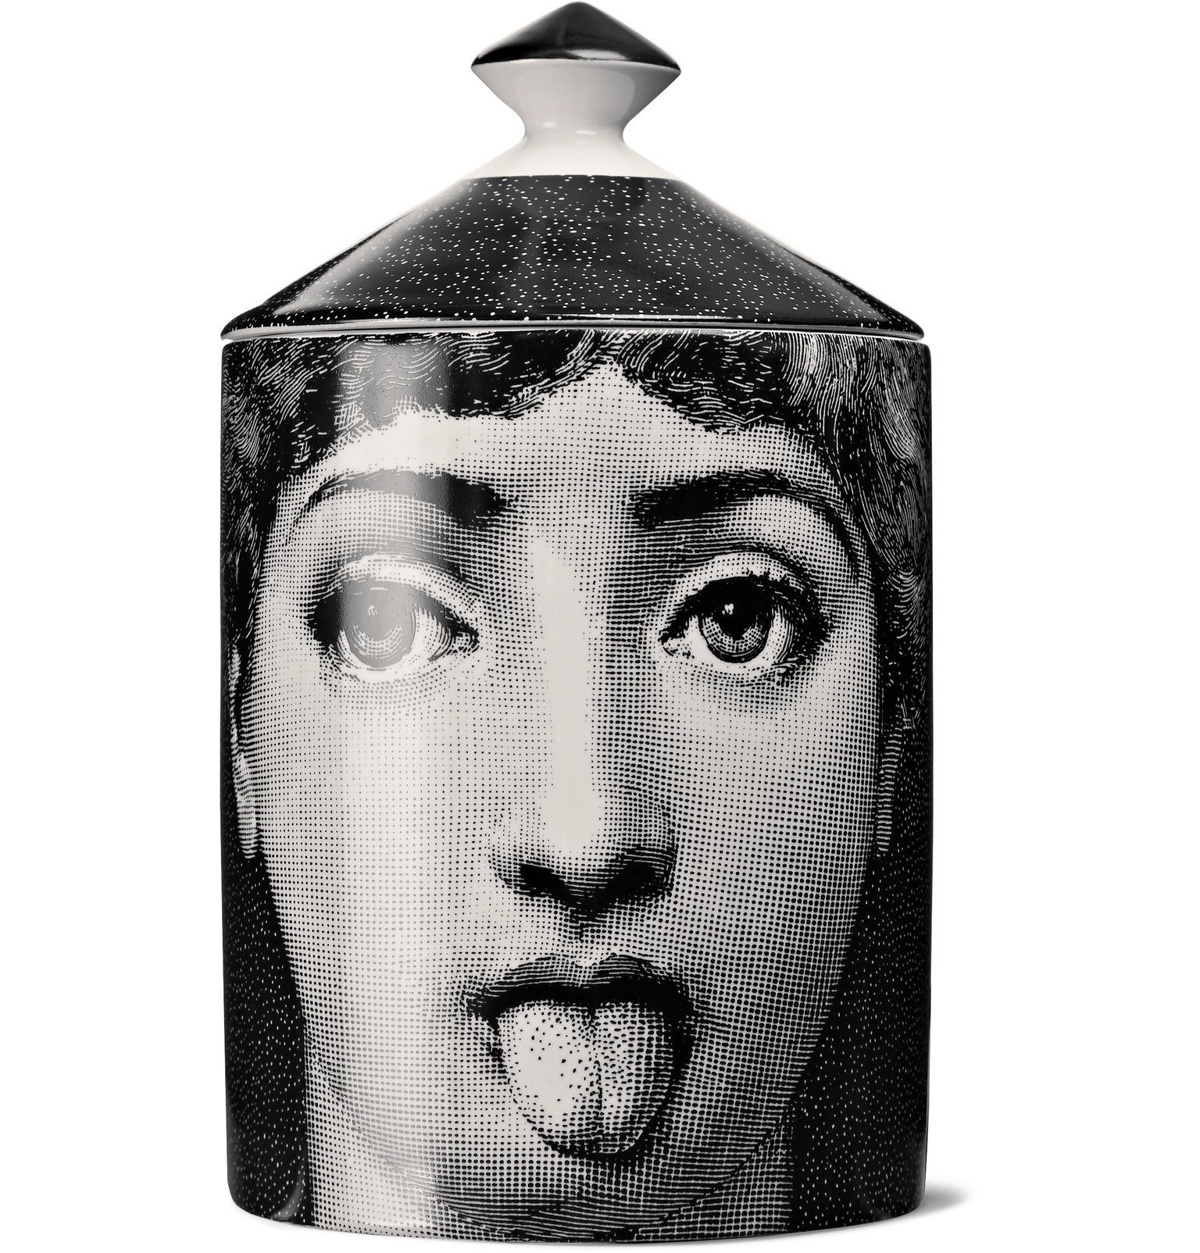 Fornasetti Burlesque Scented Candle (300g) - Farfetch